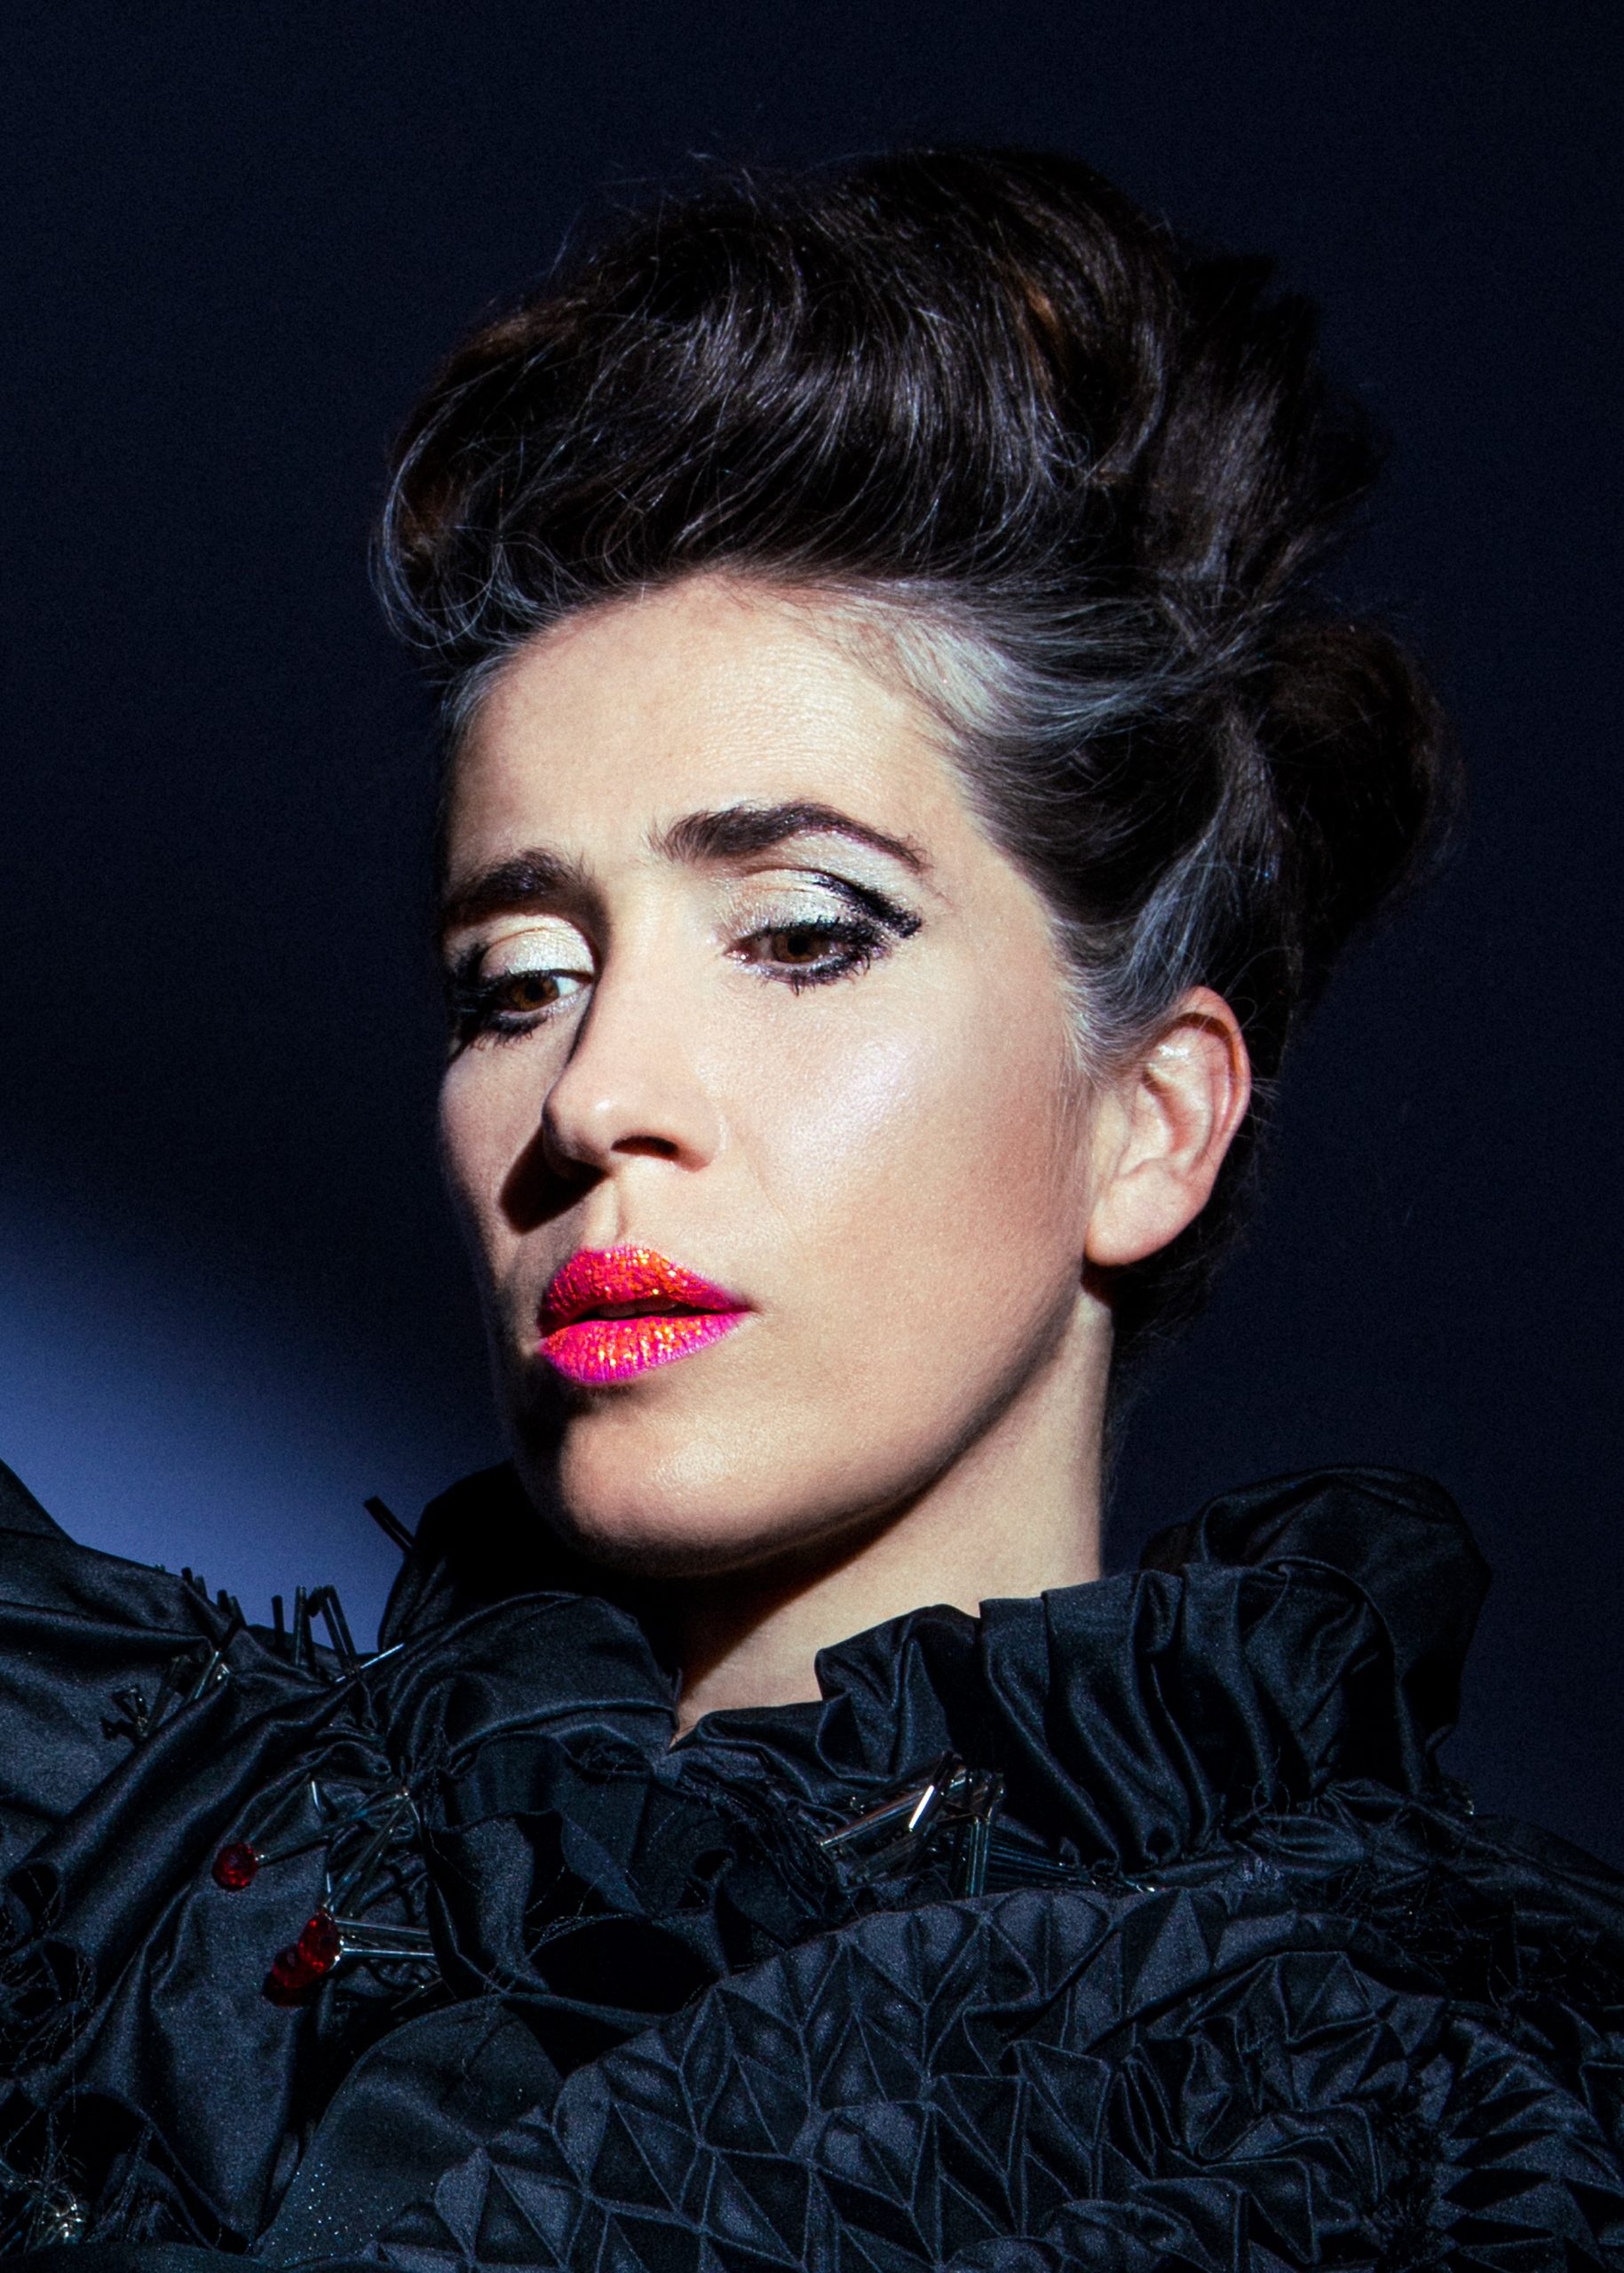 Live Interview With Musician Imogen Heap As Part Of Vdf